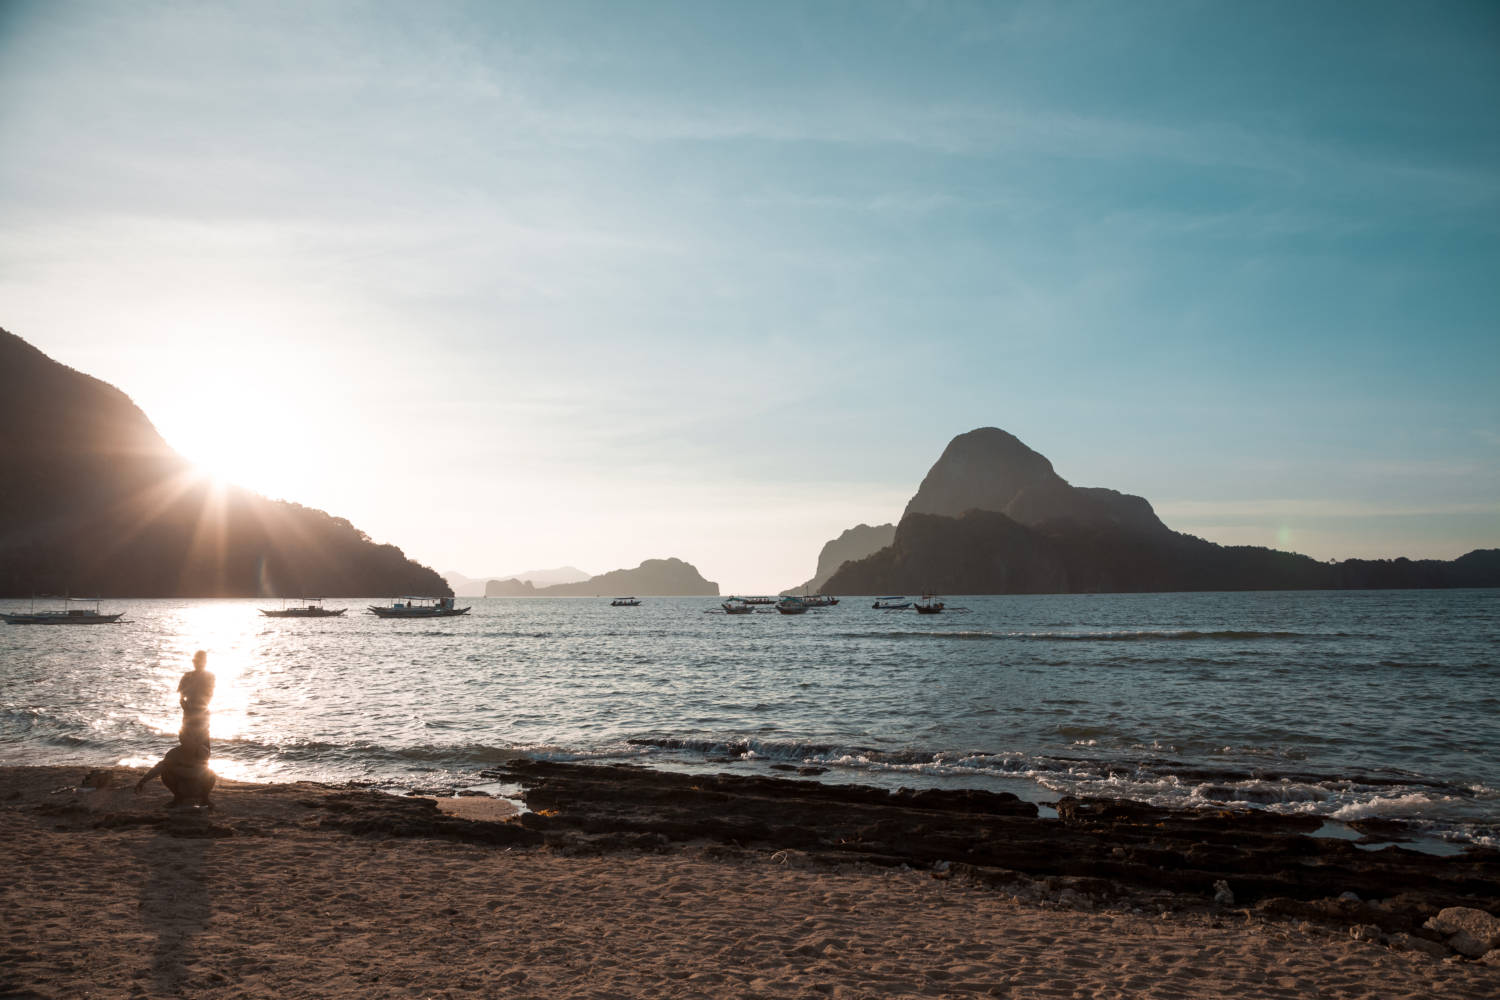 The Best Things To Do In El Nido & How To Experience It - El Nido Guide #elnido #palawan #philippines